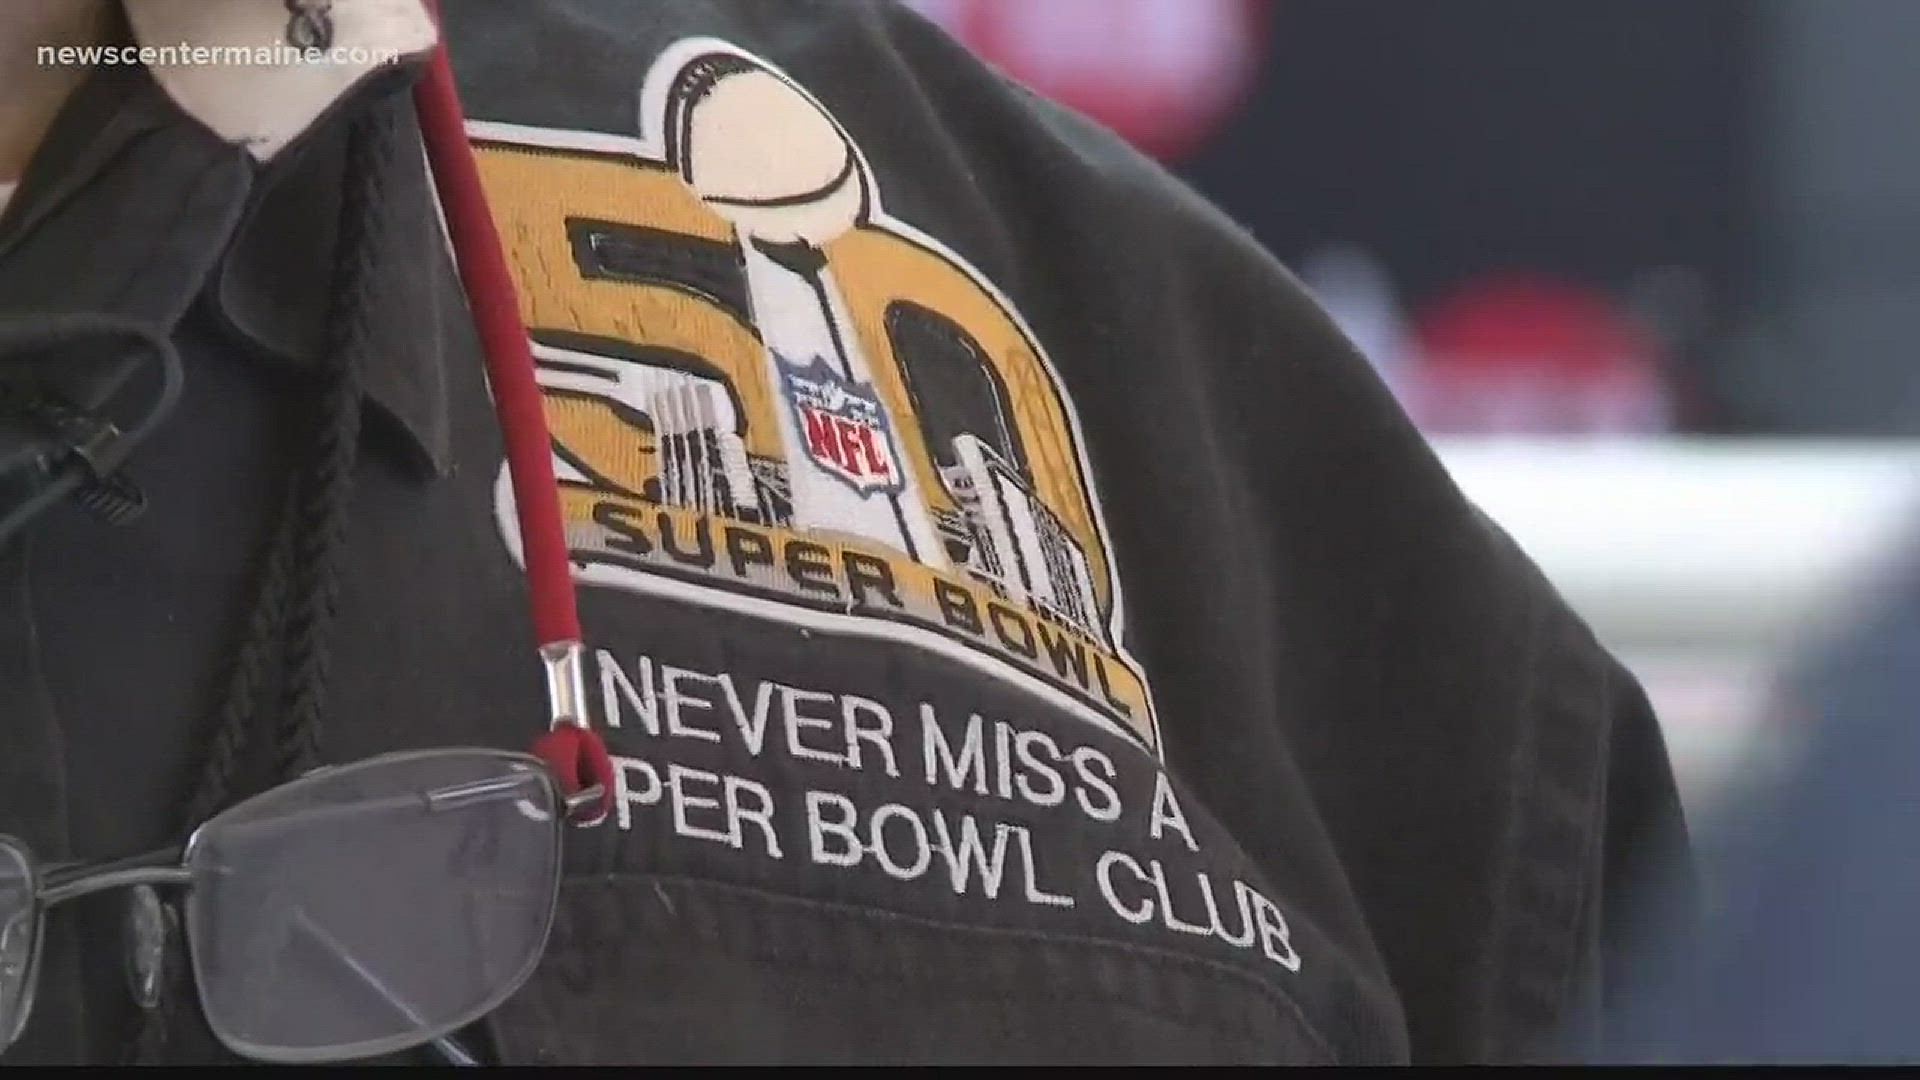 NOW: Crisman carries on the Super Bowl tradition